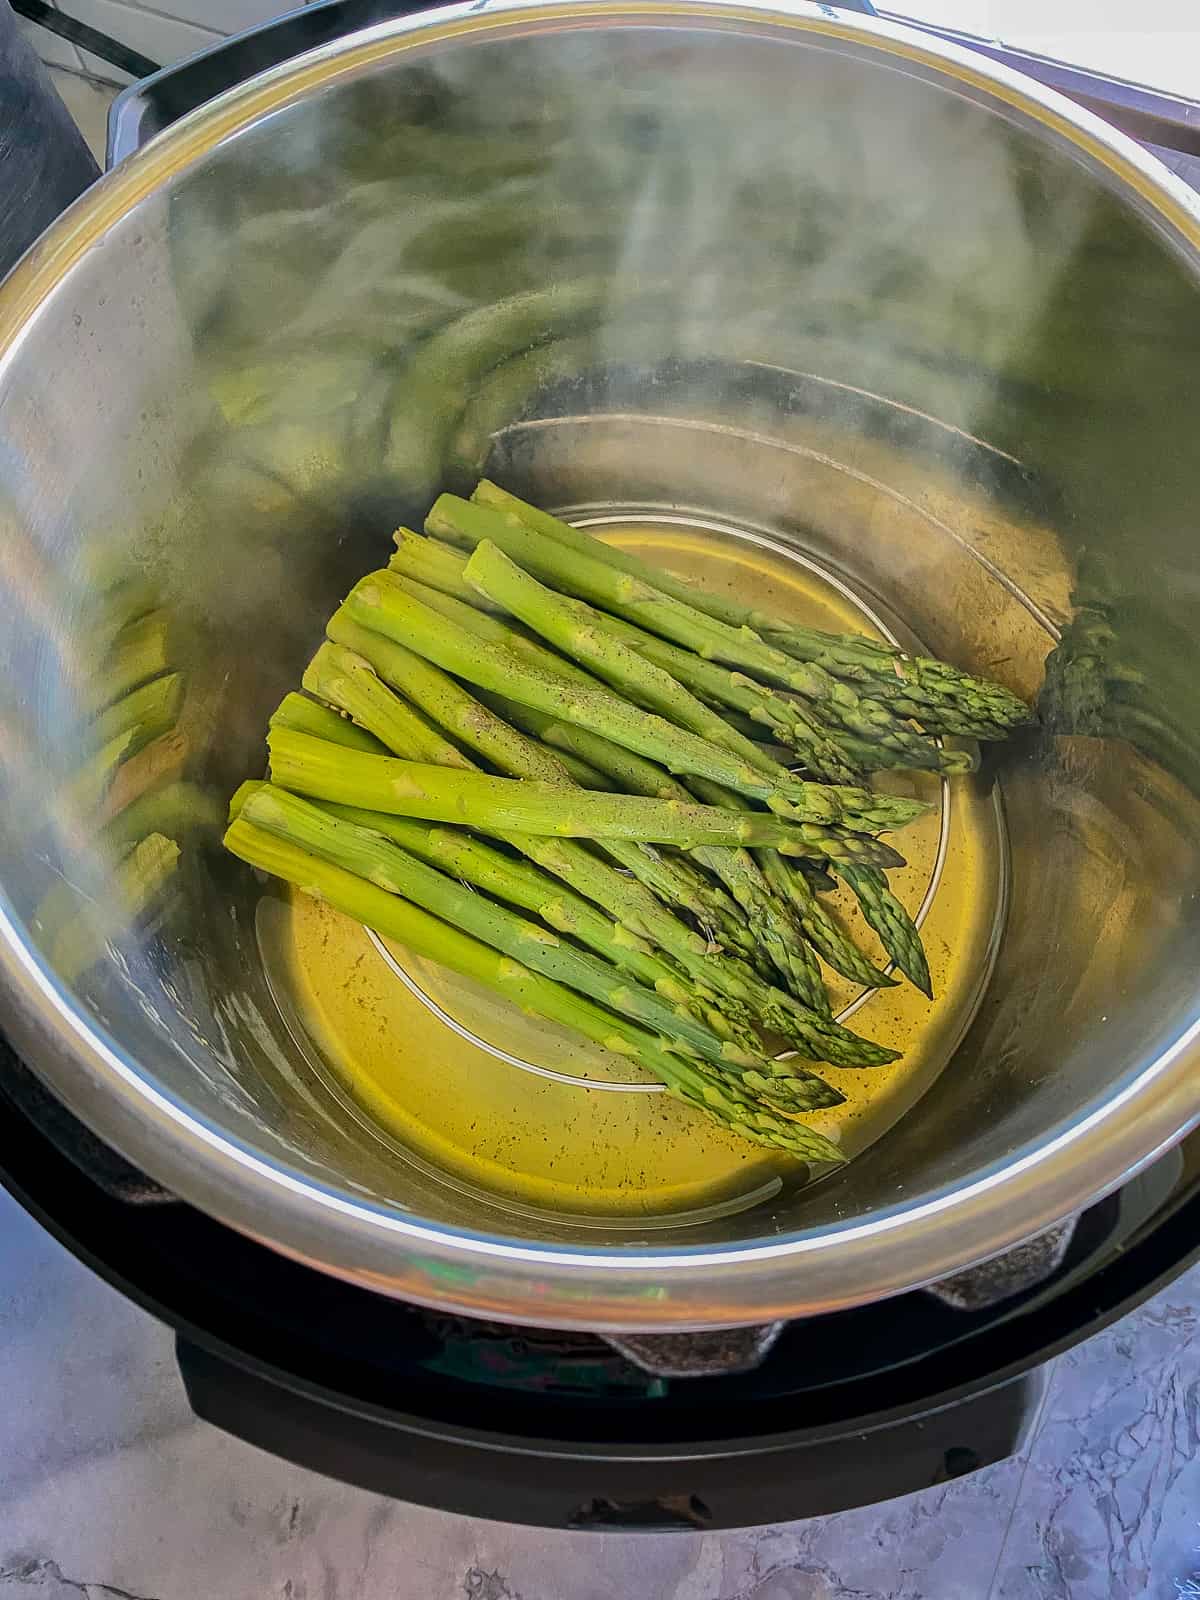 Asparagus cooking in the Instant pot.